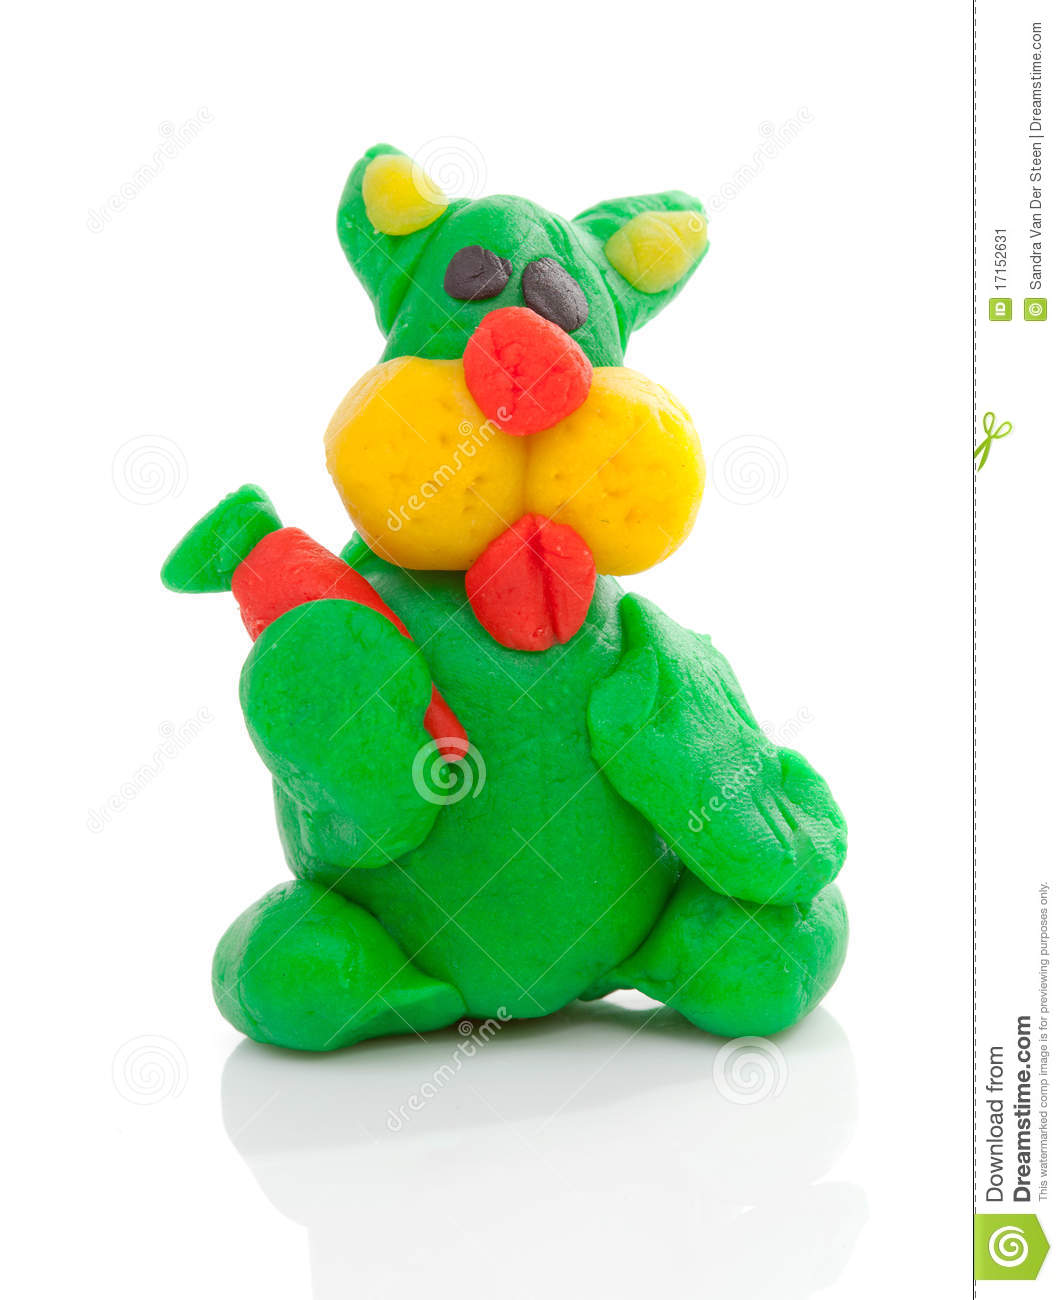 Green Bunny Clay Modeling Stock Image   Image  17152631